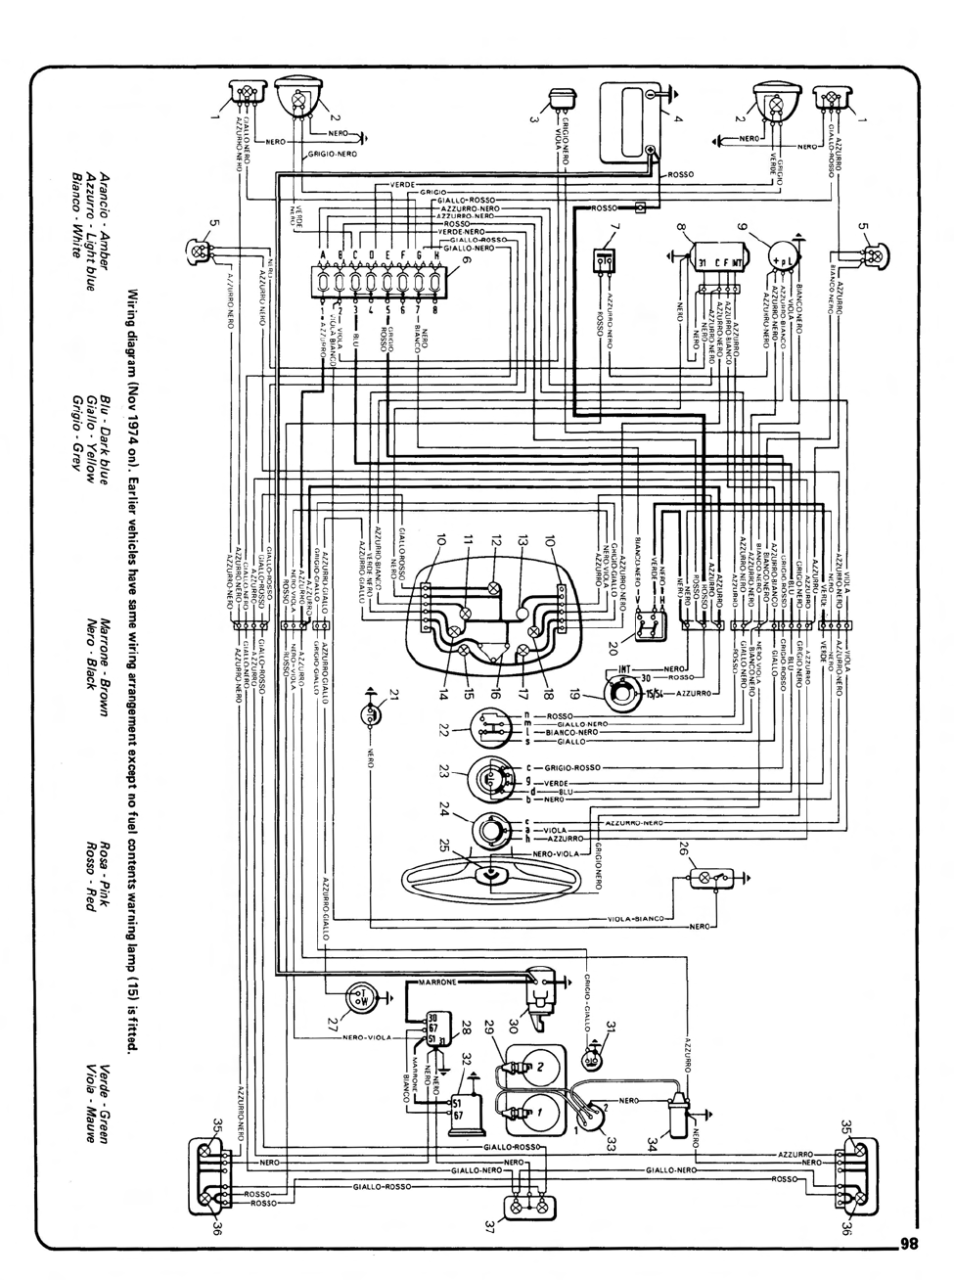 Co1224T Wiring Diagram